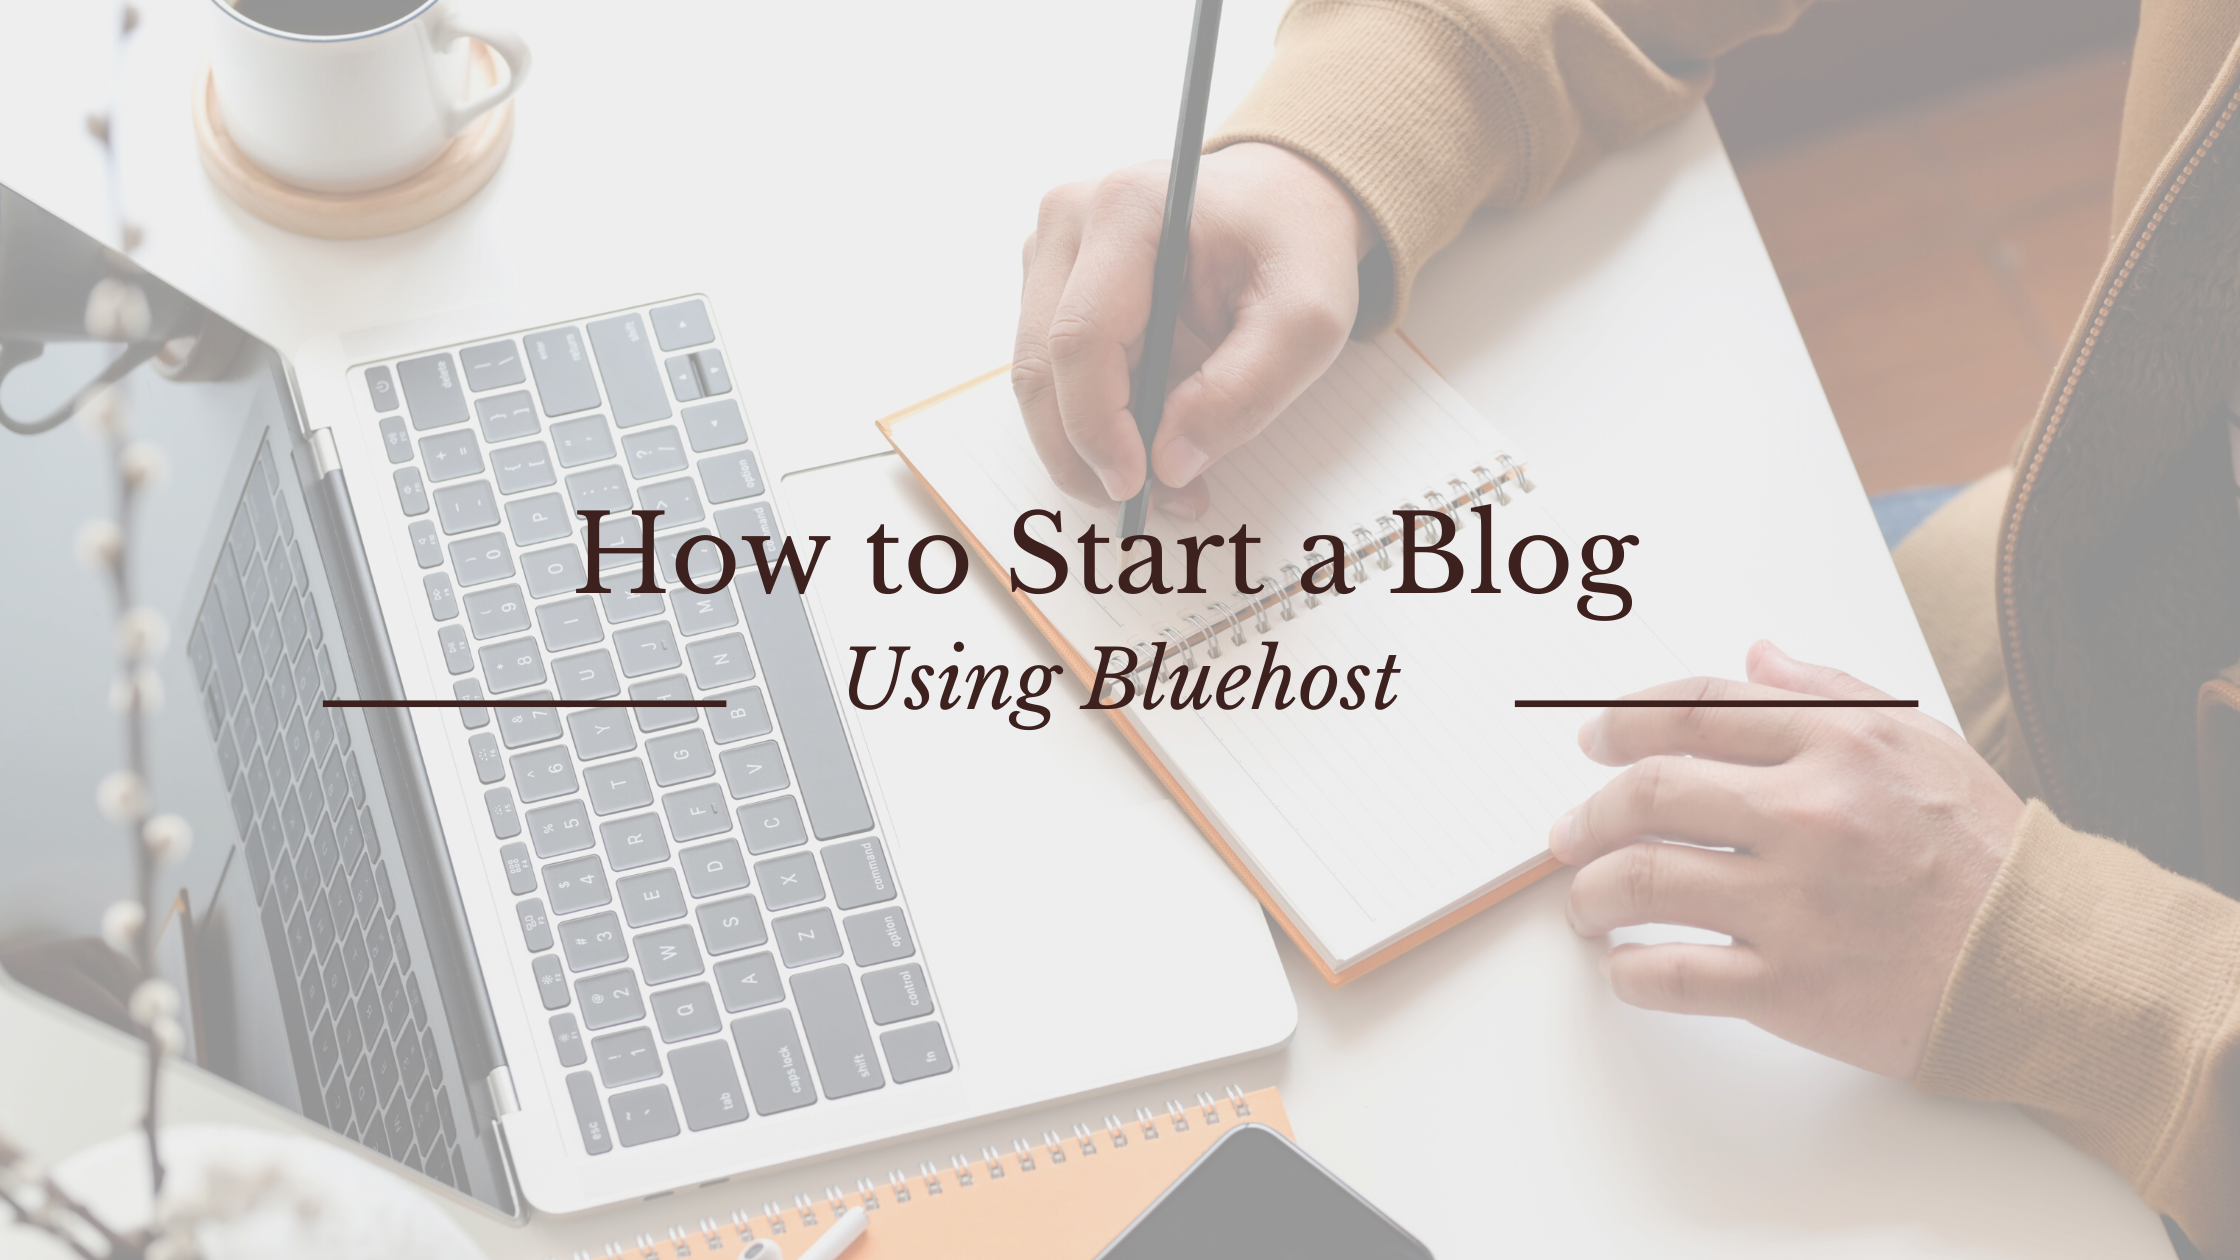 How to Start a Blog Using Bluehost